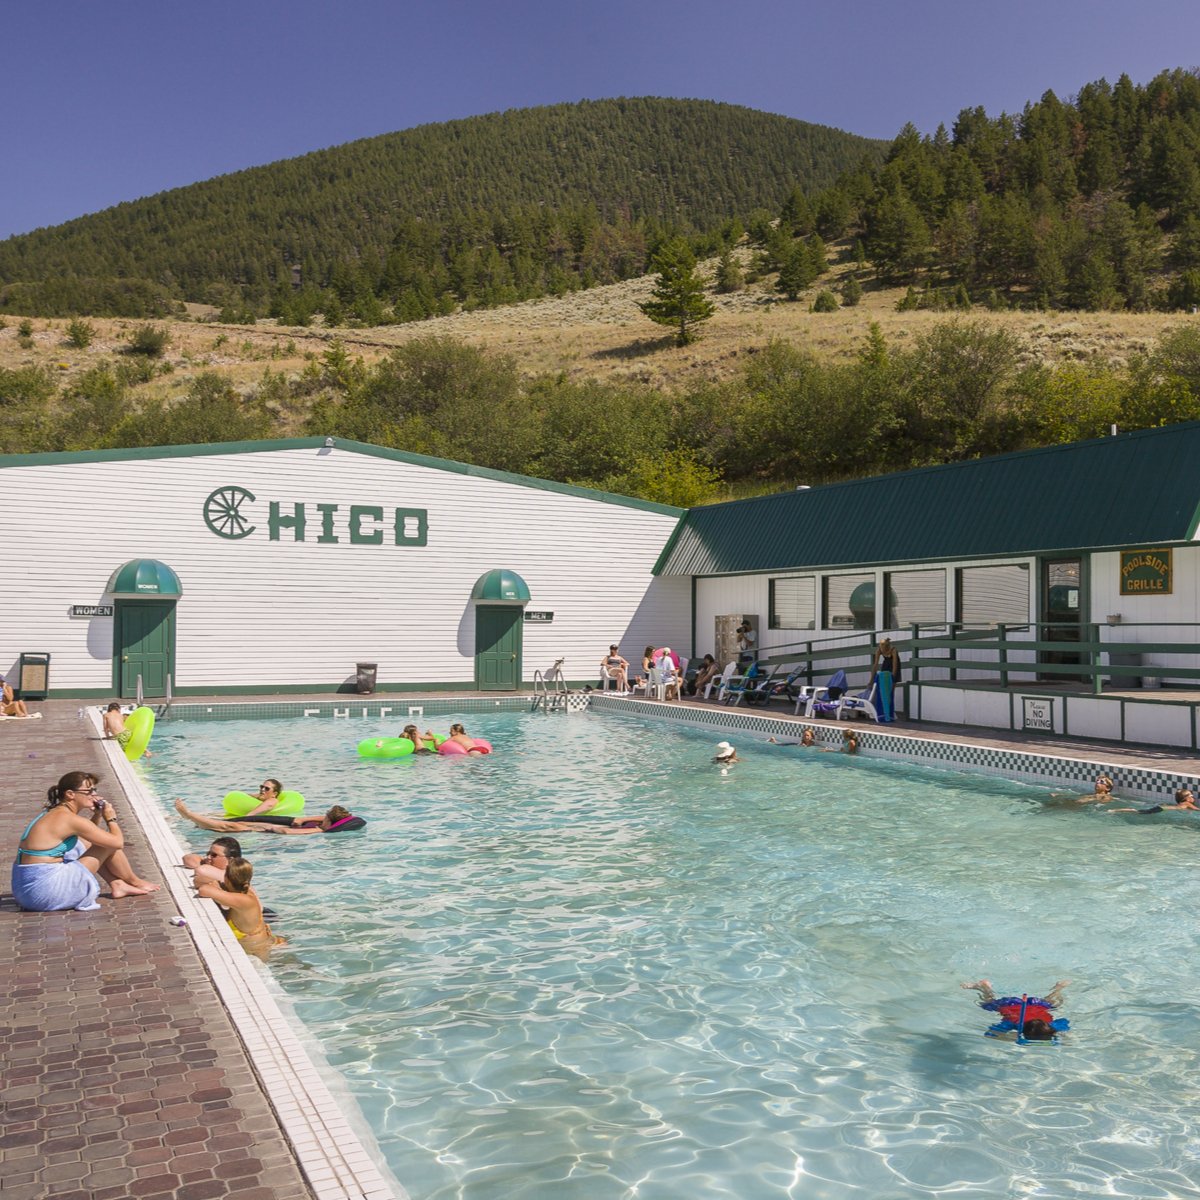 Chico Hot Springs in Montana.